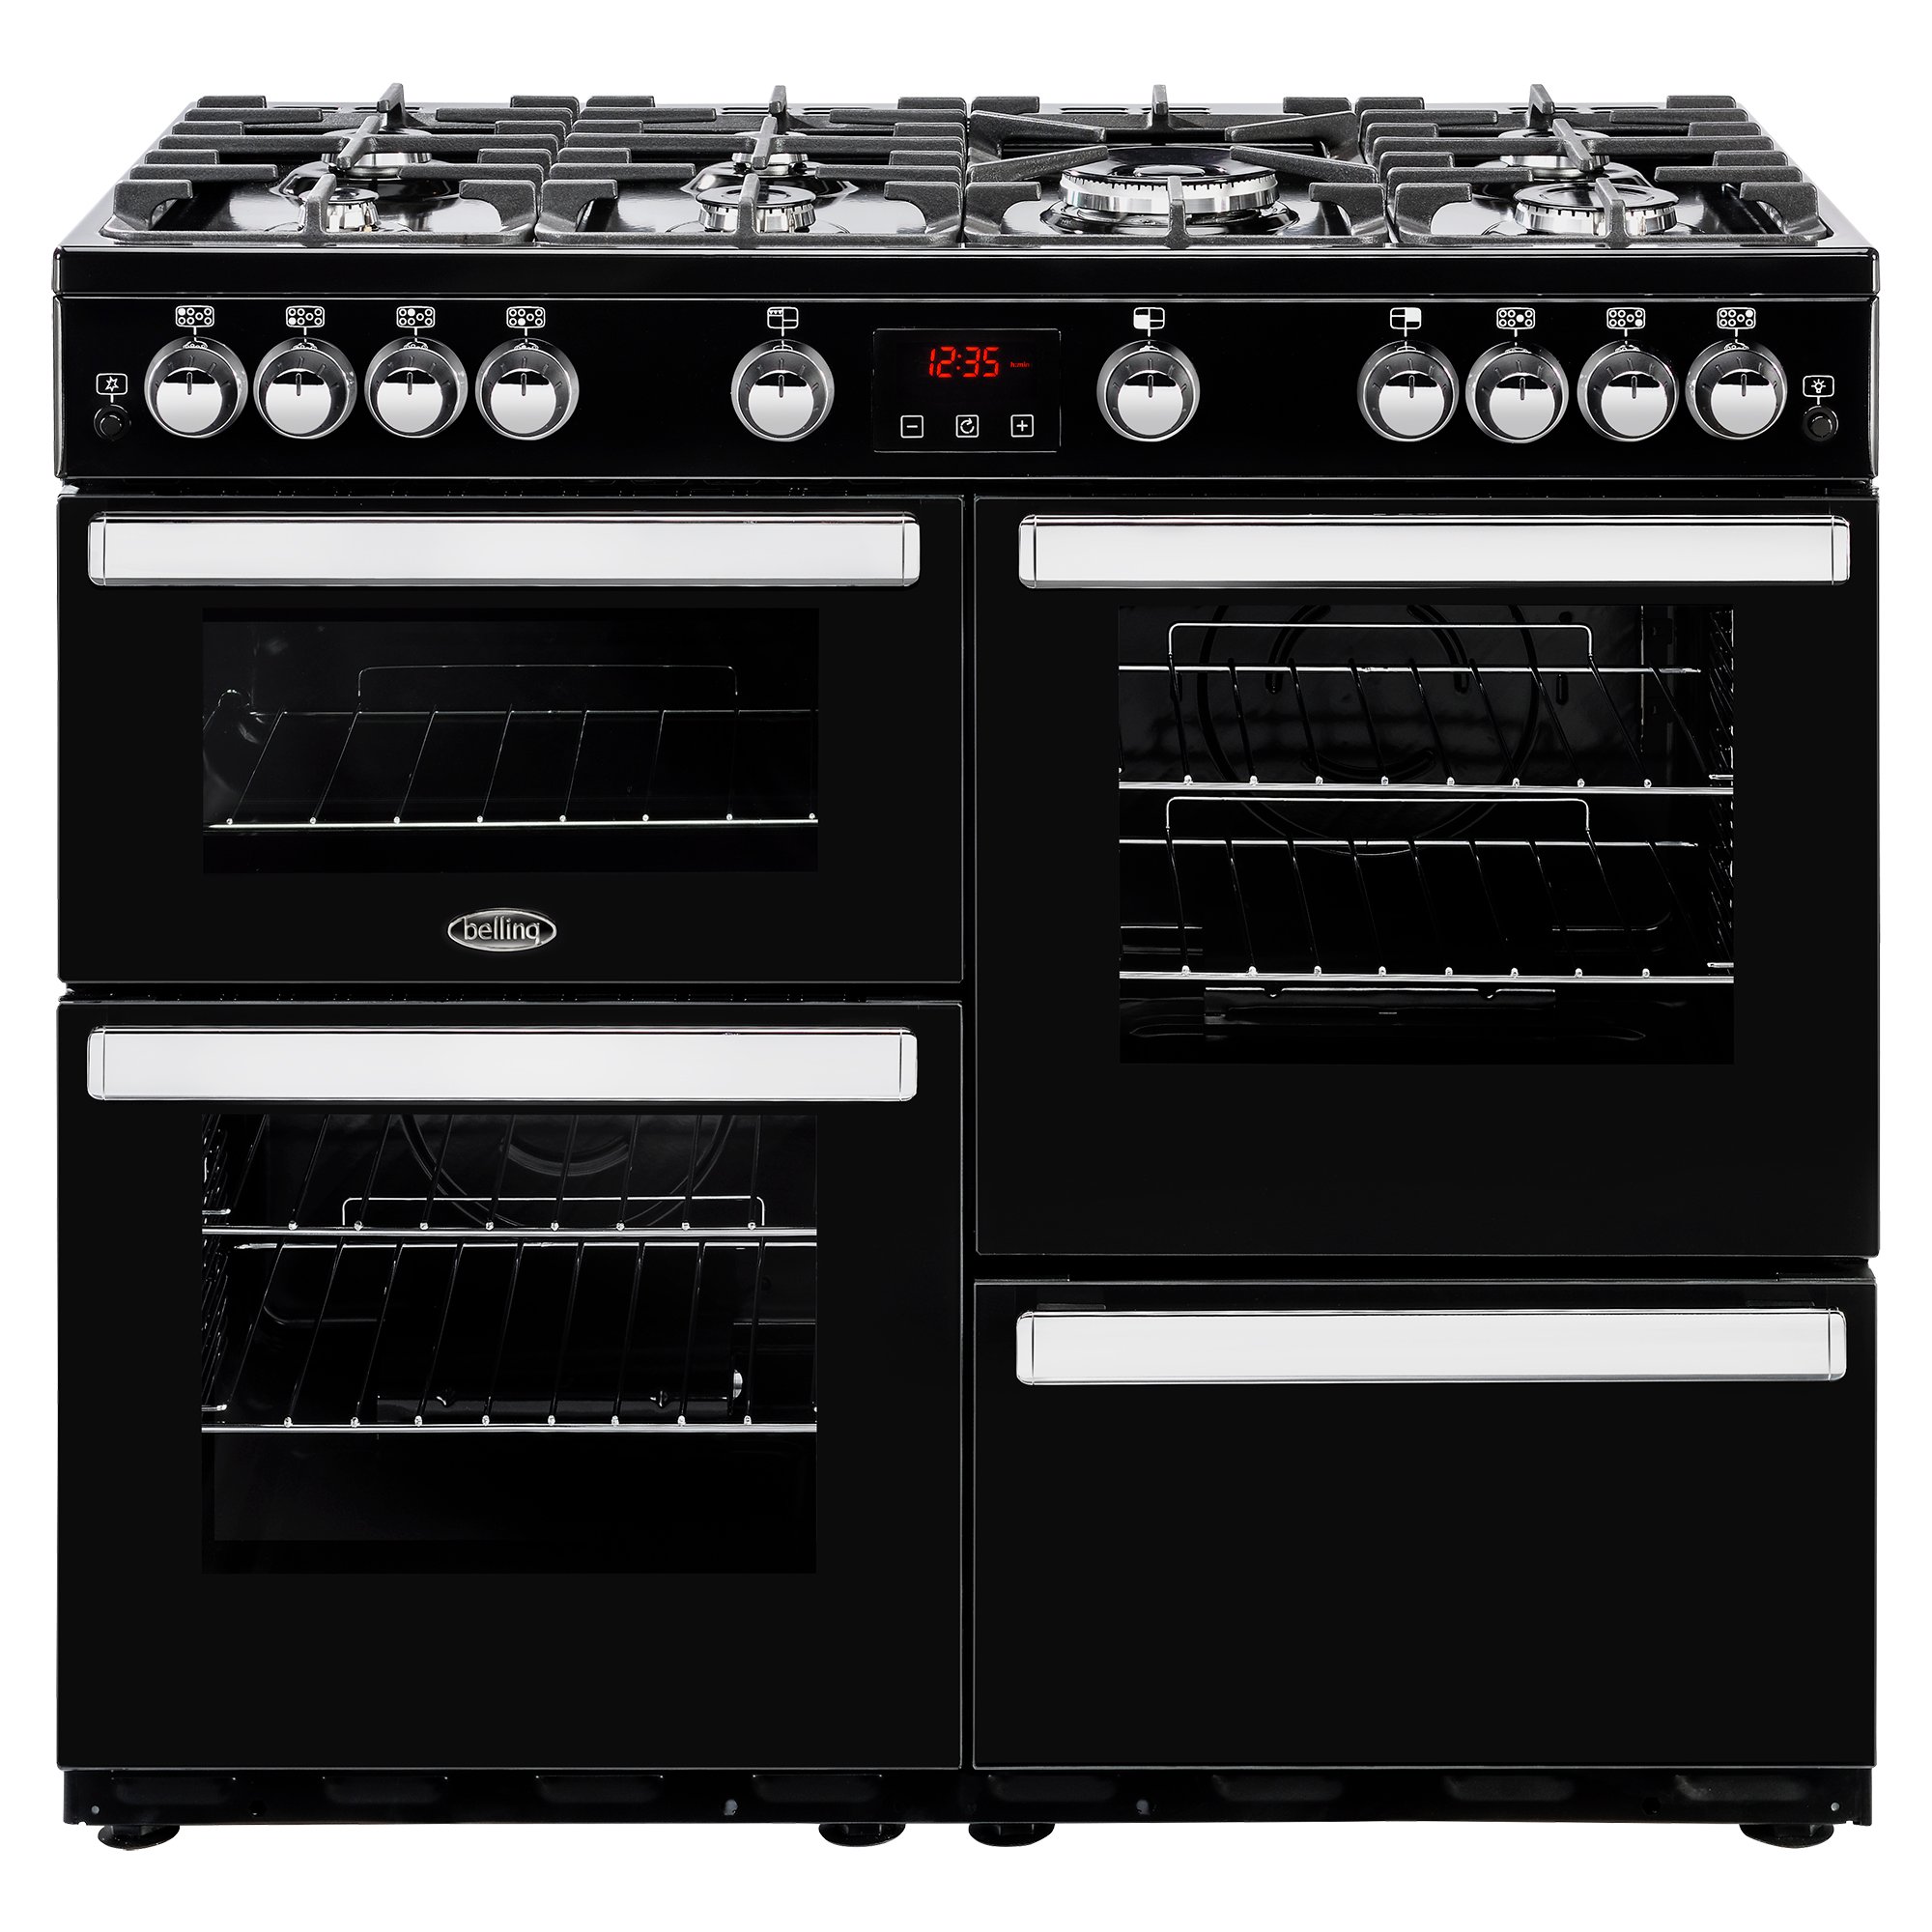 100cm gas range cooker with 7 burner gas hob with 4kW PowerWok burner, Maxi-Clock and easy clean enamel.